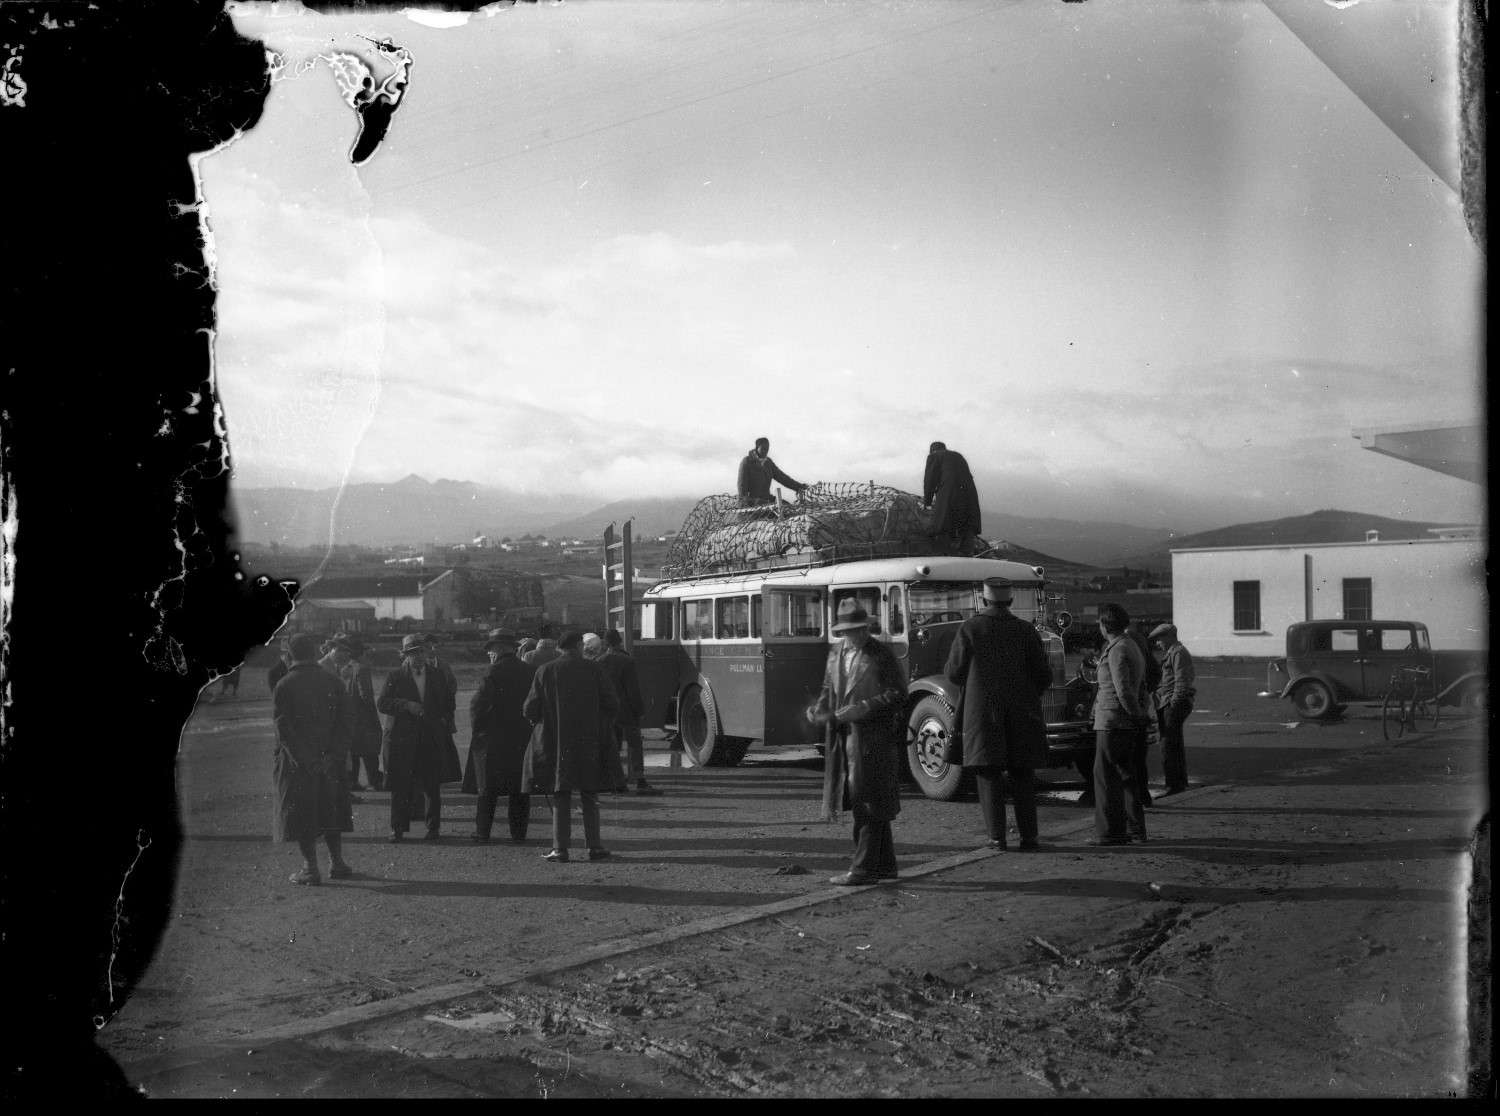 Gare de Oujda - Figures in European dress surround automobile being loaded by figures in Moroccan dress at the Gare de Oujda, with mountains visible in the background.